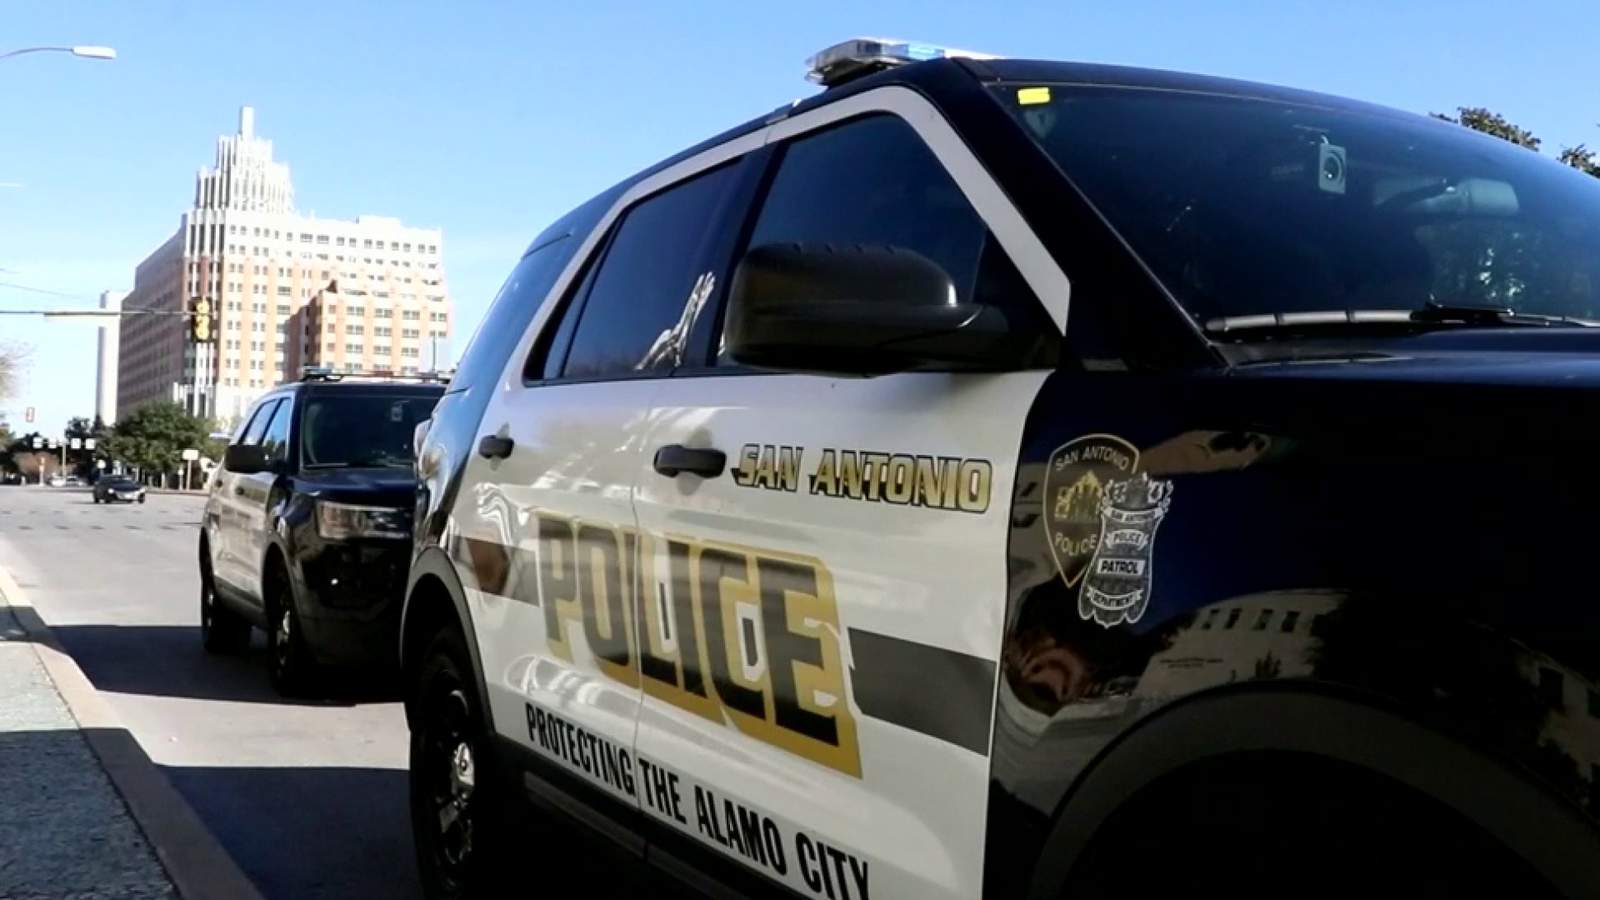 San Antonio police union faces calls for reform as 2 petitions circulate